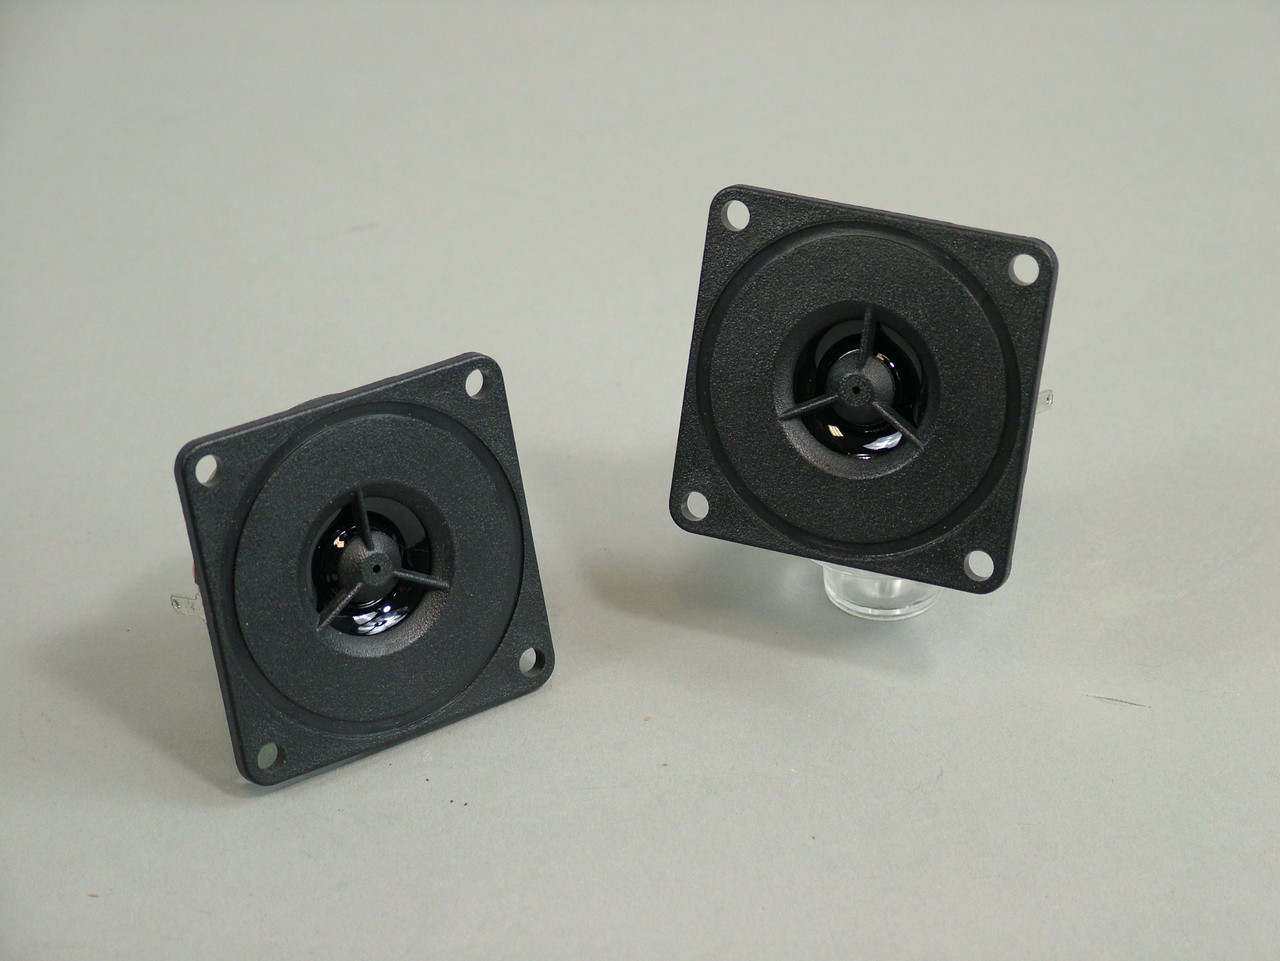 8 ohm tweeter with 4 ohm woofer